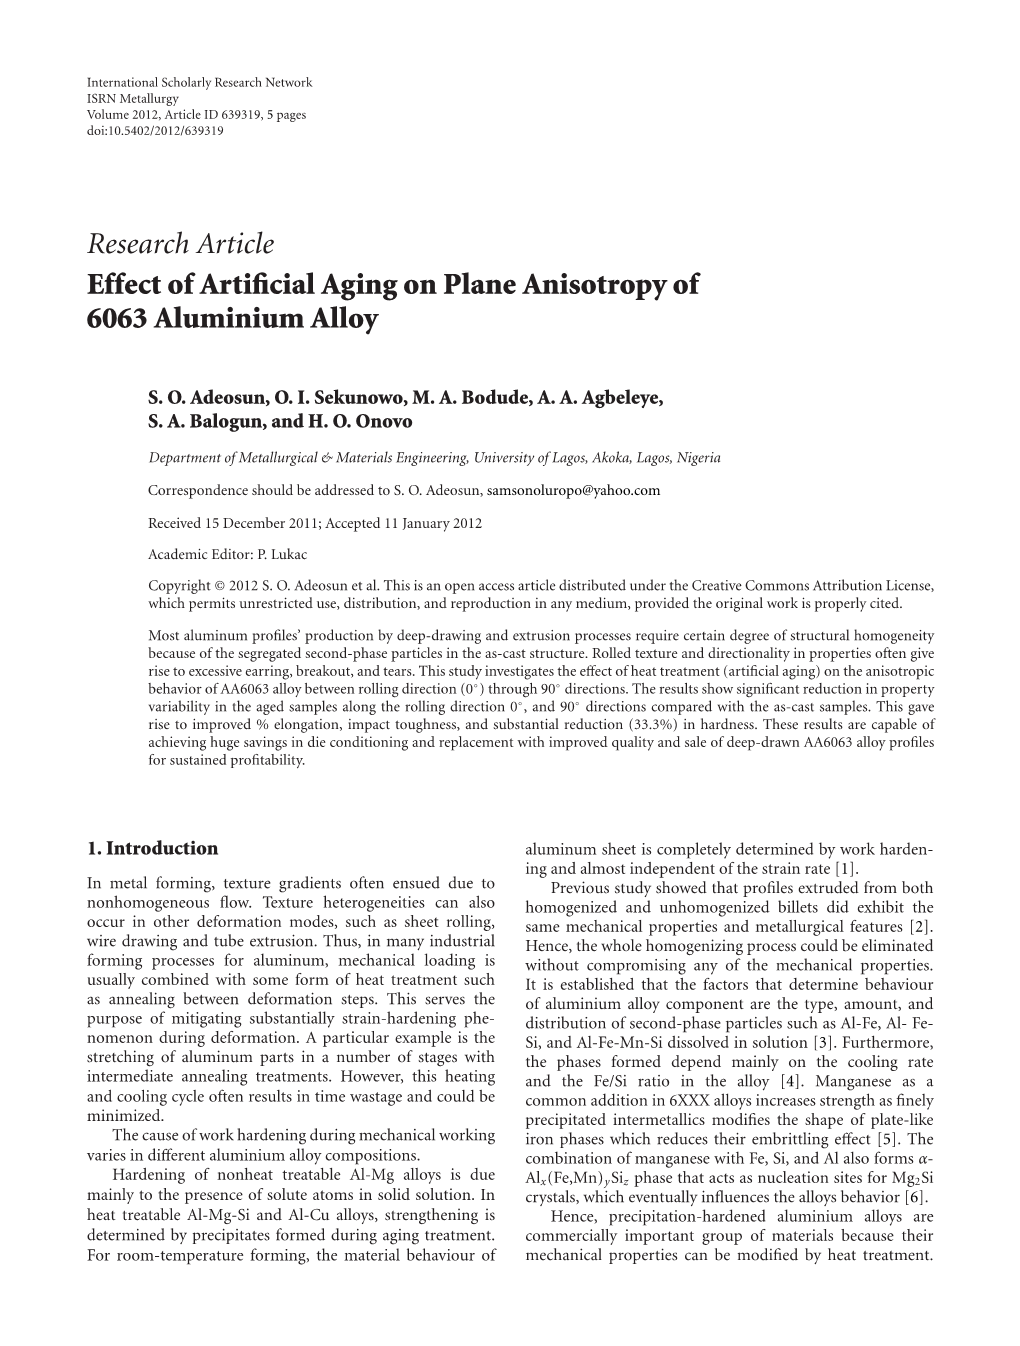 Effect of Artificial Aging on Plane Anisotropy of 6063 Aluminium Alloy